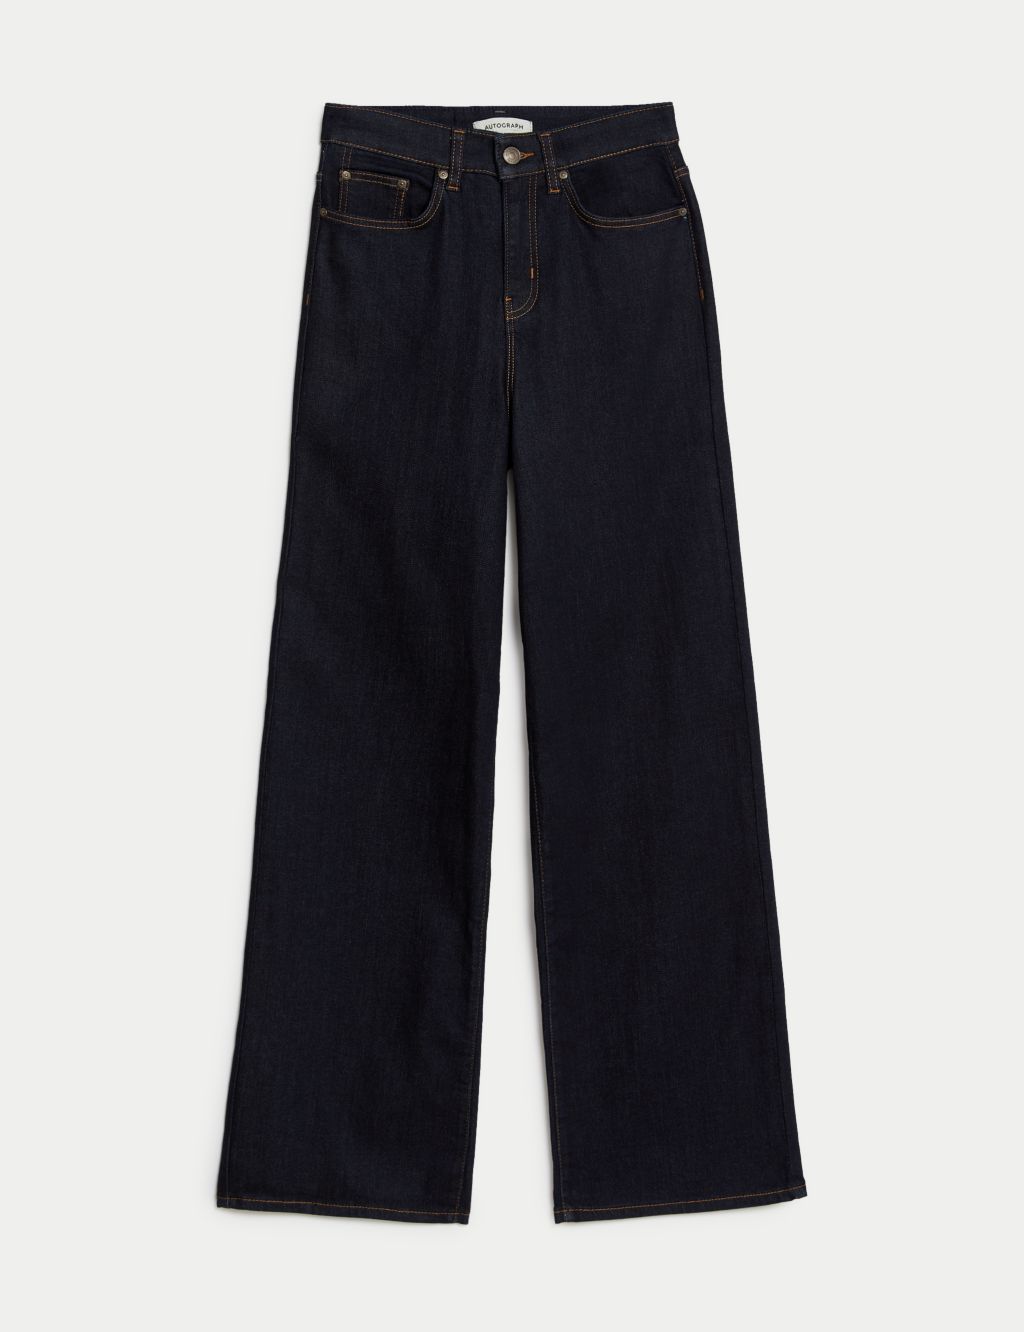 Lyocell™ Blend High Waisted Wide Leg Jeans image 2